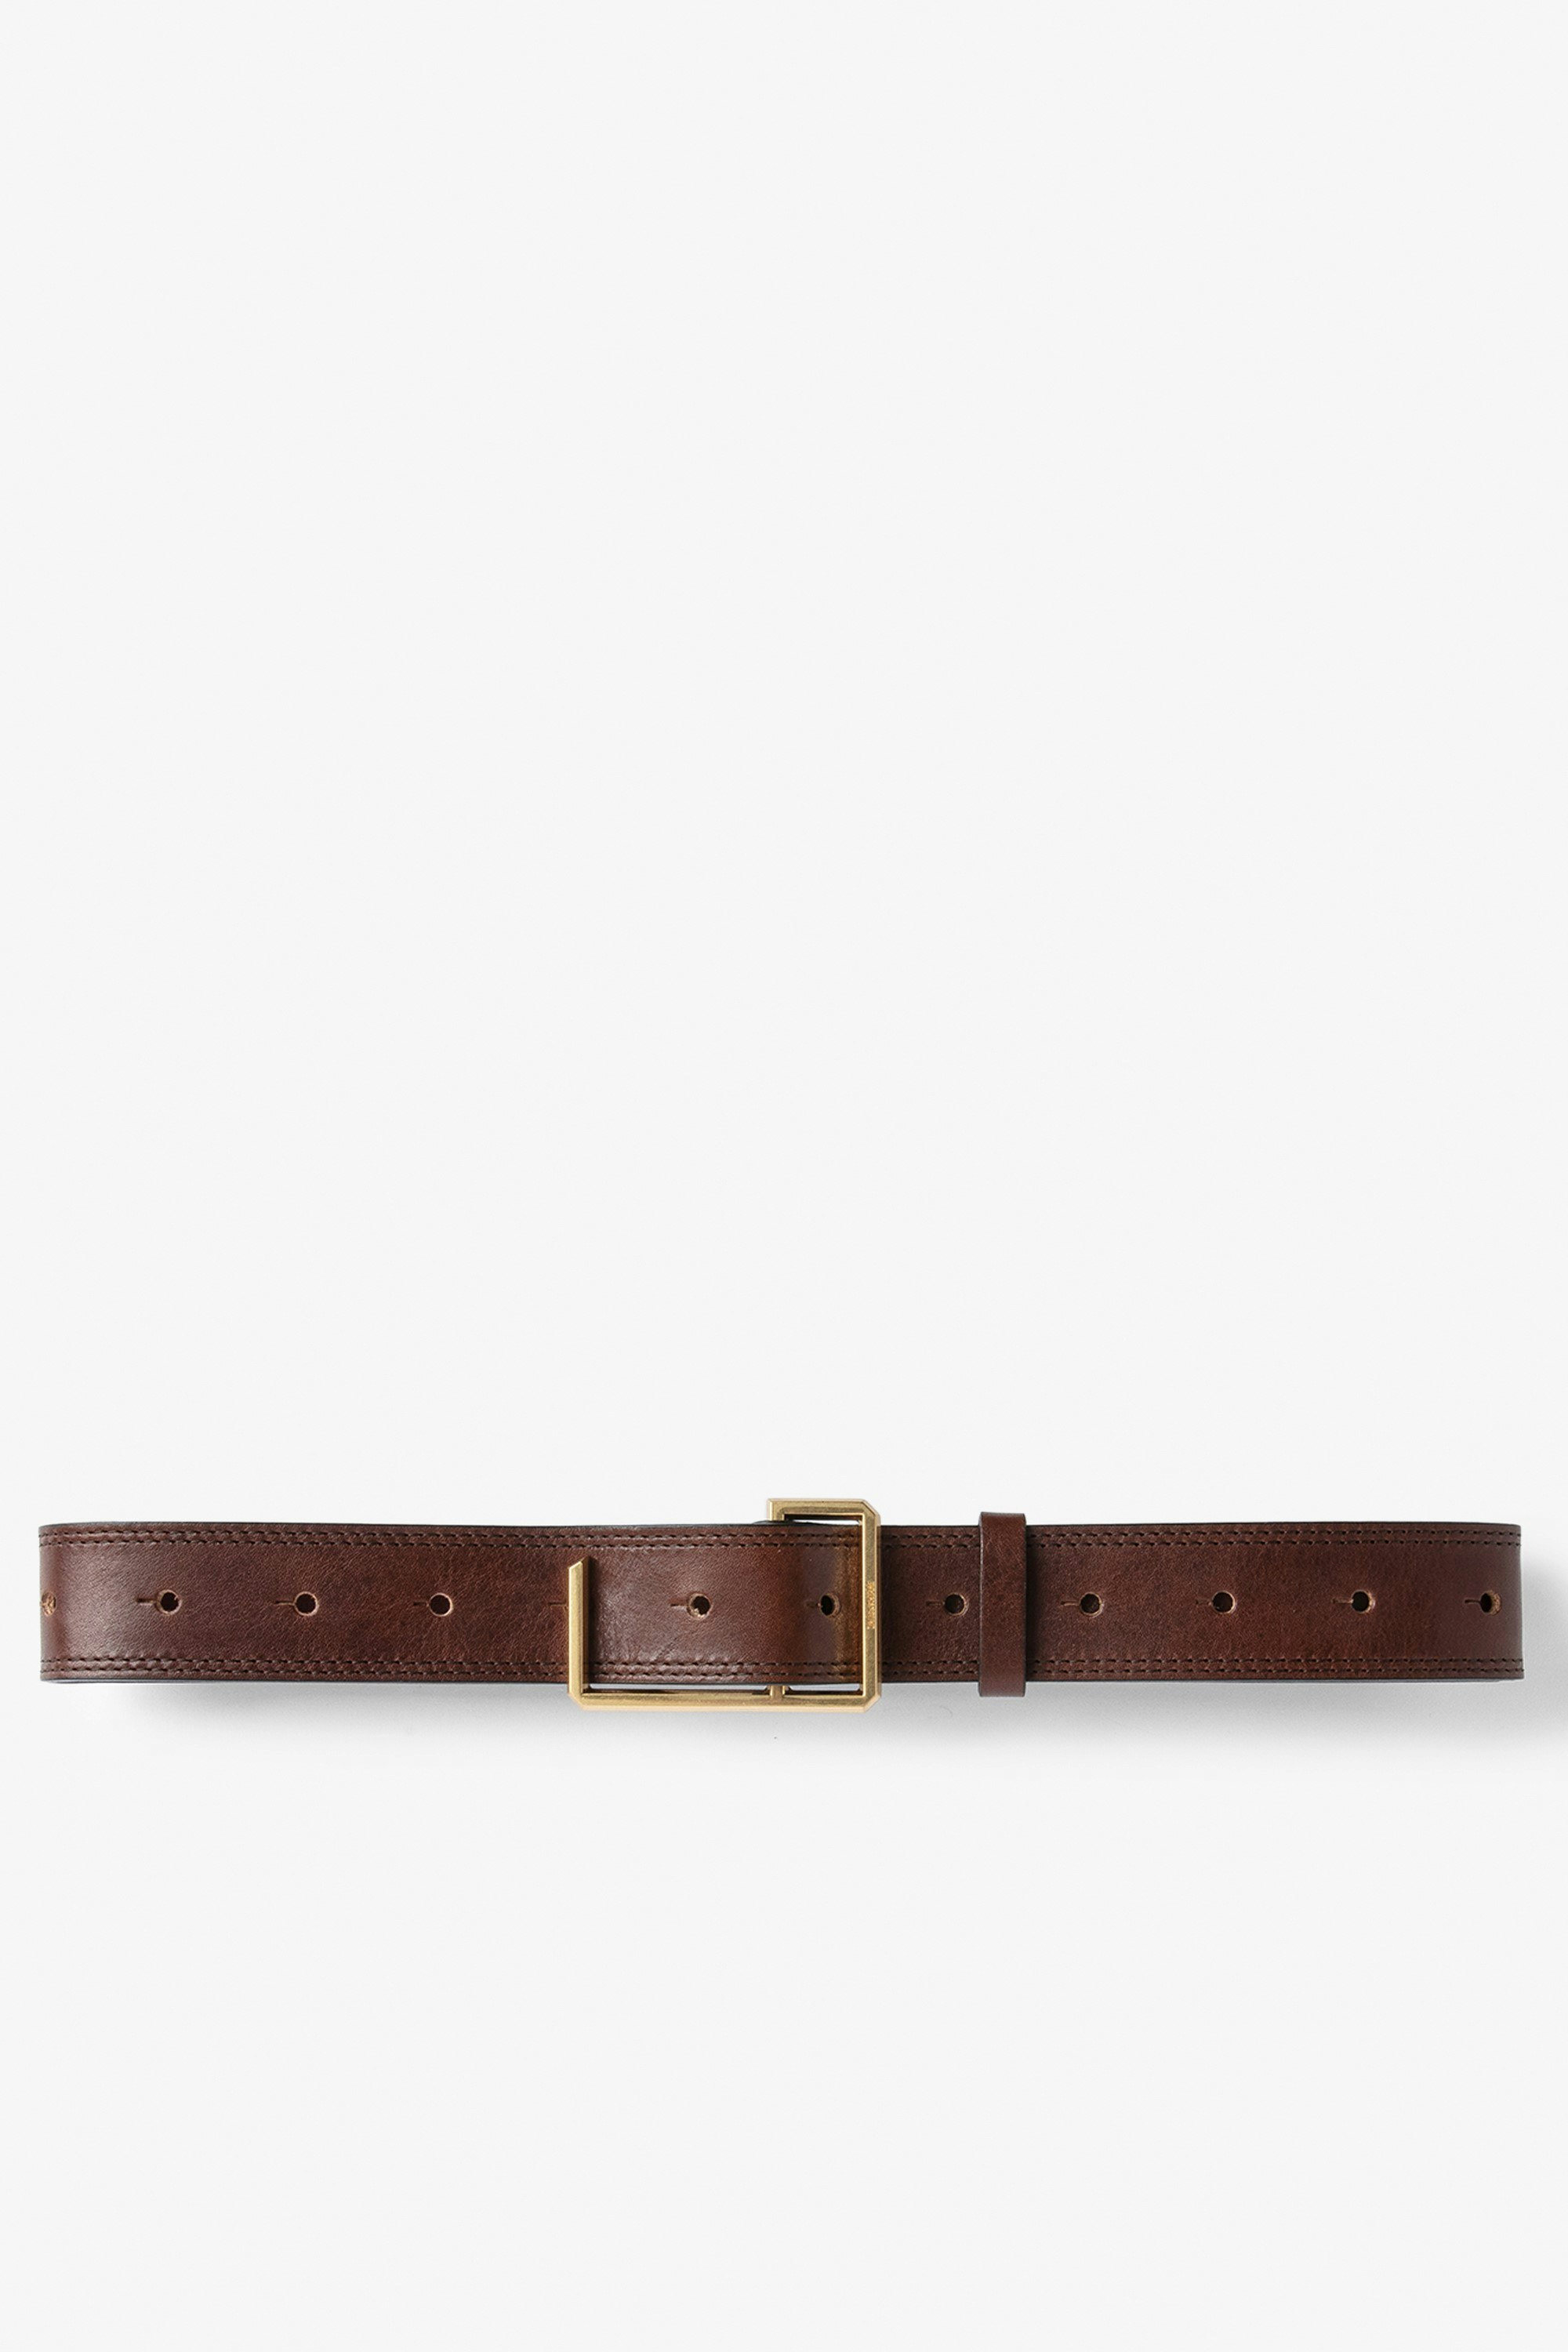 La Cecilia Obsession Belt - Women's belt in brown leather with gold-tone C buckle